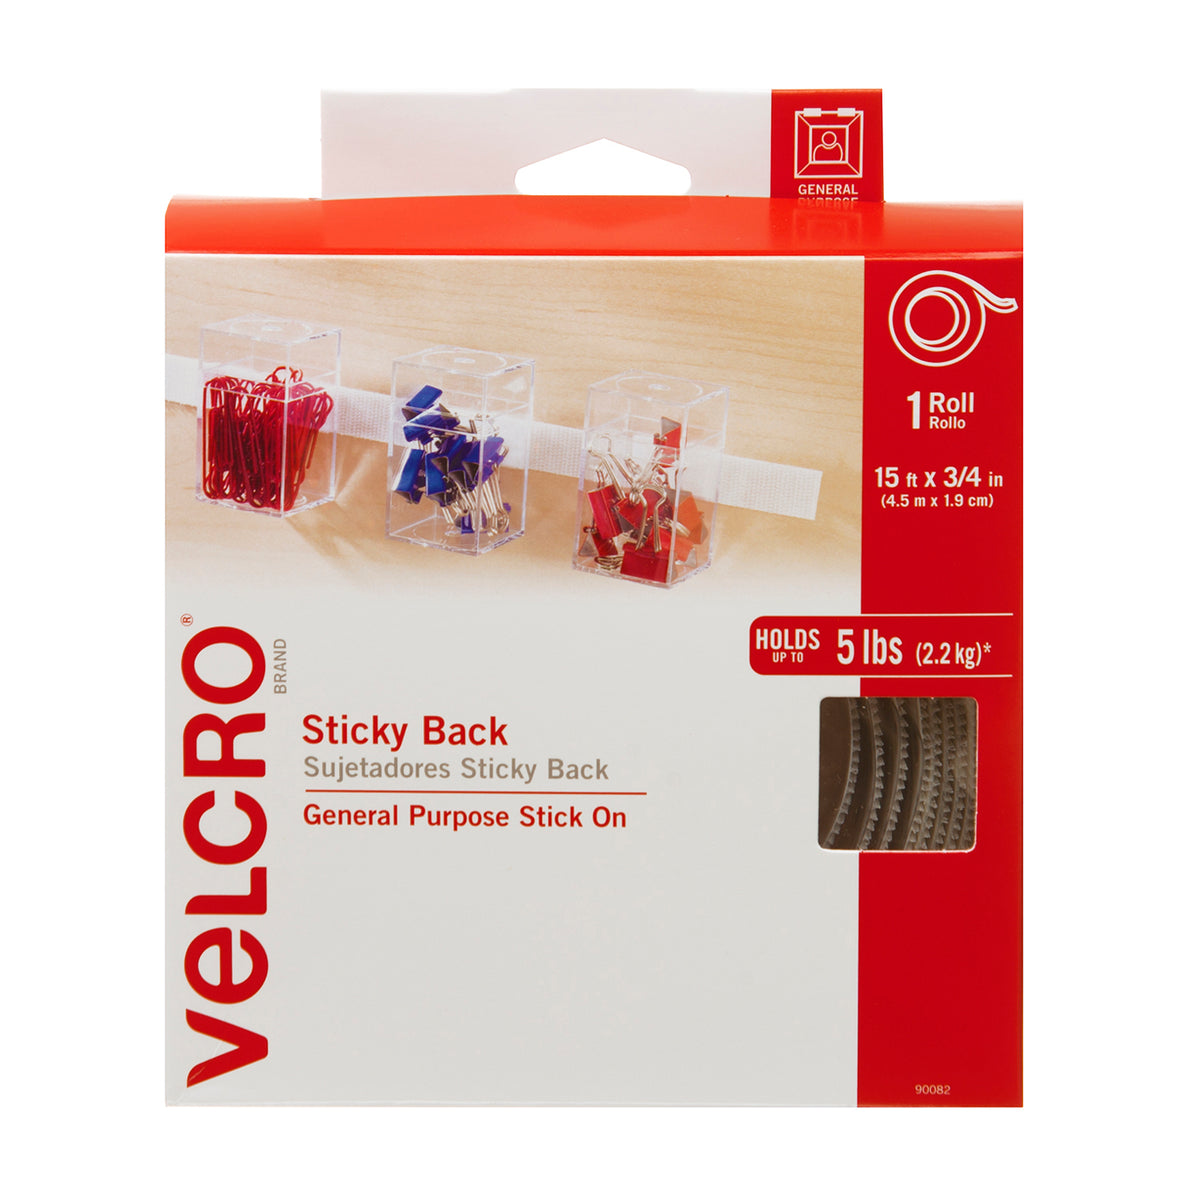 Great Deals On Flexible And Durable Wholesale Velcro Tape